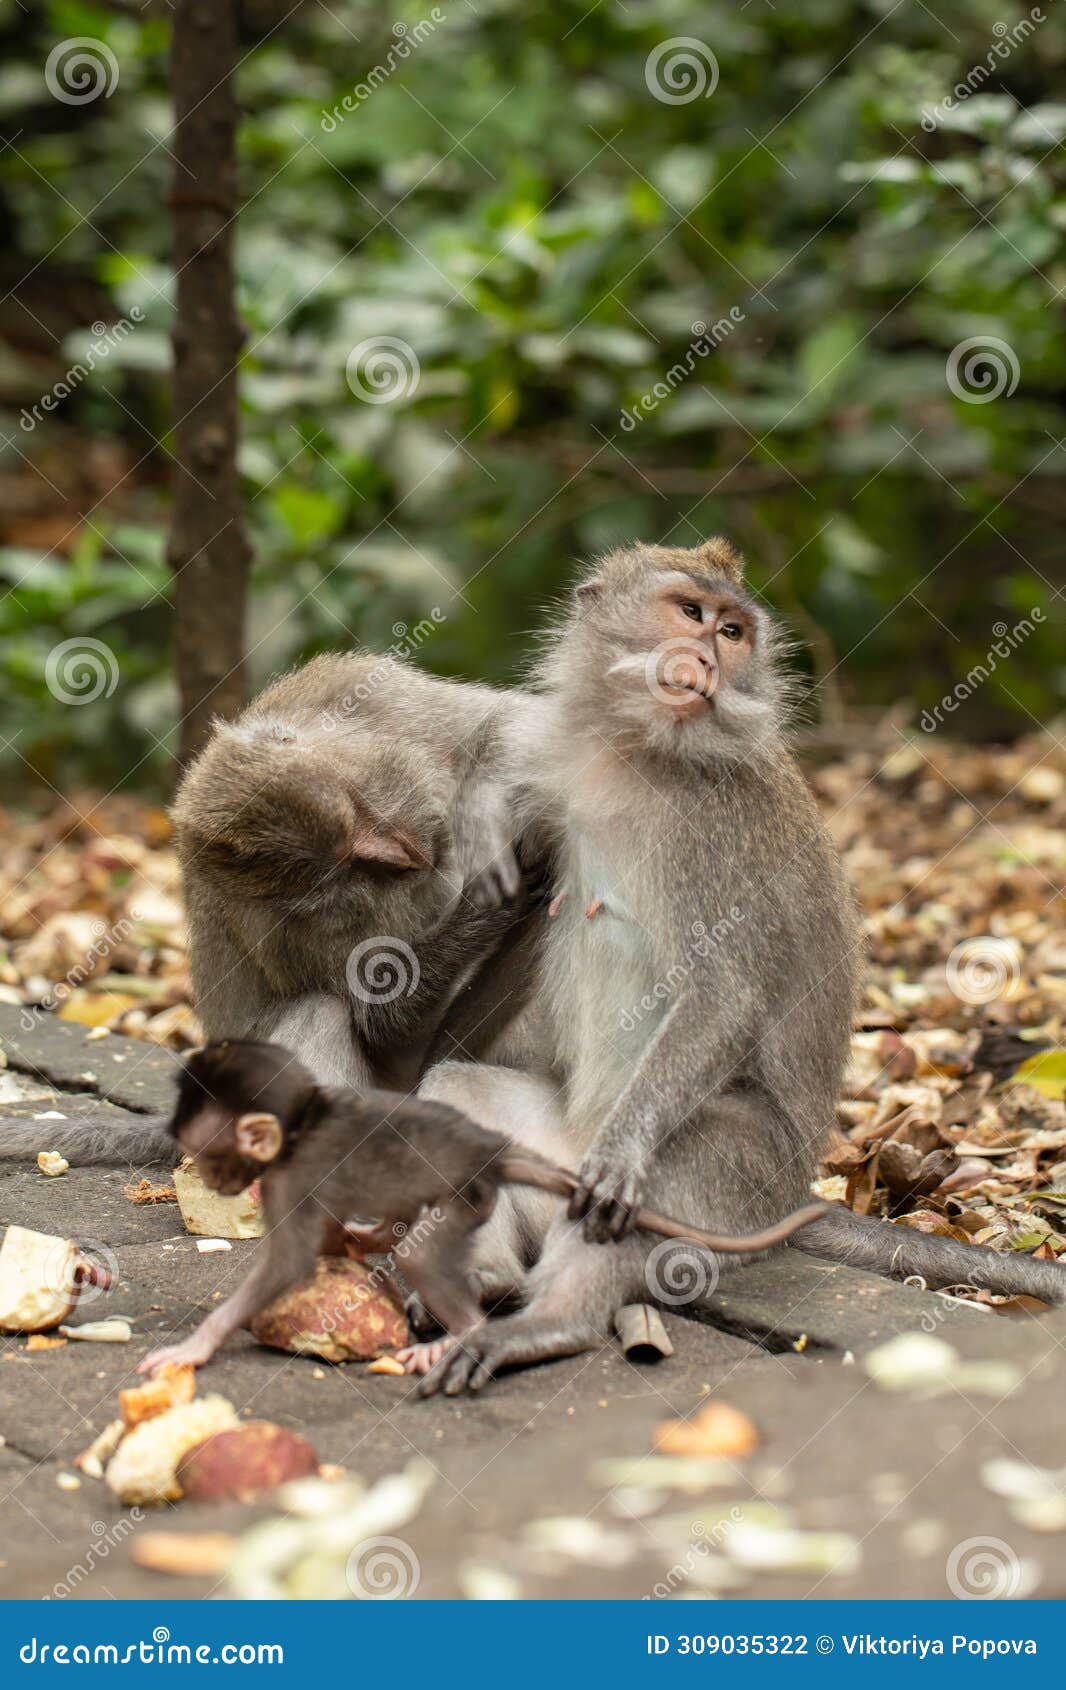 a family of primates sitting together in the forest. forest of monkeys in ubud, bali